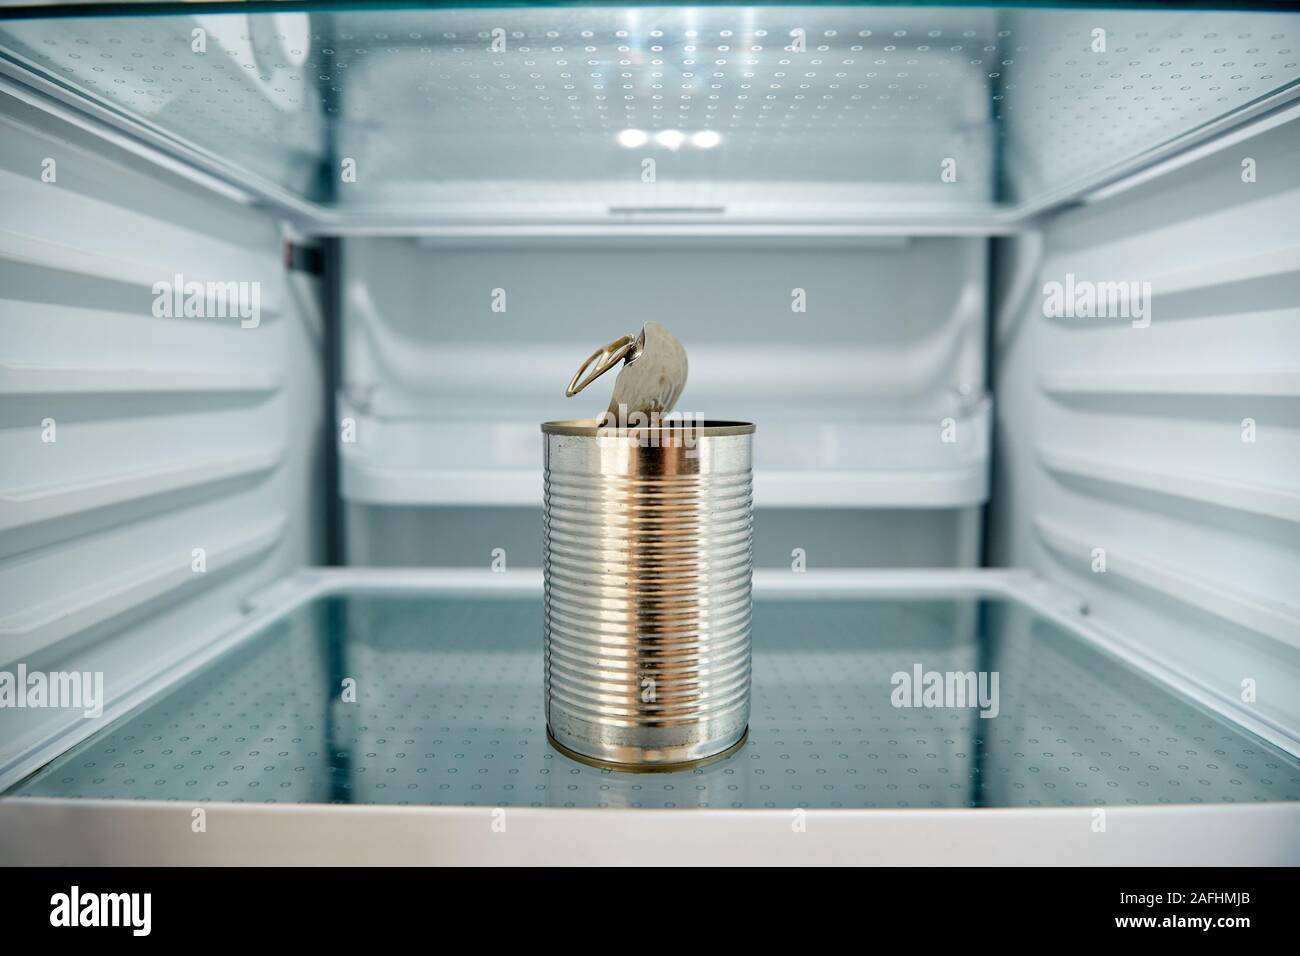 View Looking Inside Refrigerator Empty Except For Open Tin Can On Shelf Stock Photo